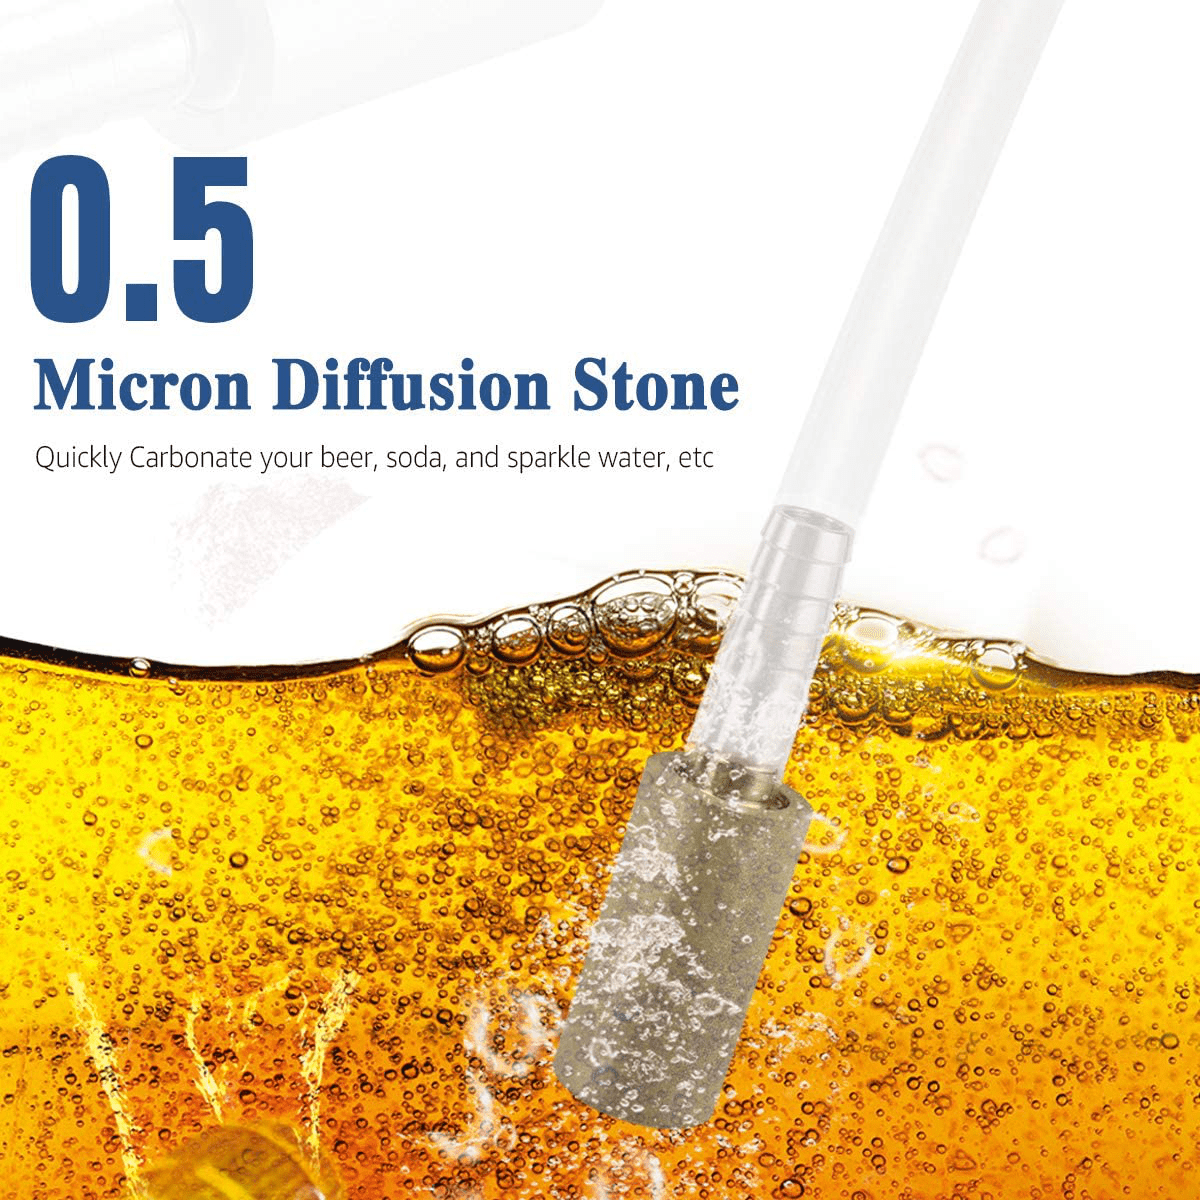 (2 Set) FERRODAY 0.5 Micron Diffusion Stone Stainless Steel Aeration Stone Carbonating Stone with 1/4" Barb for Homebrew Wine Beer Soda Air Stone 0.5 Micron + 20 Inch Silicone Hose Animals & Pet Supplies > Pet Supplies > Fish Supplies > Aquarium Air Stones & Diffusers Ferroday   